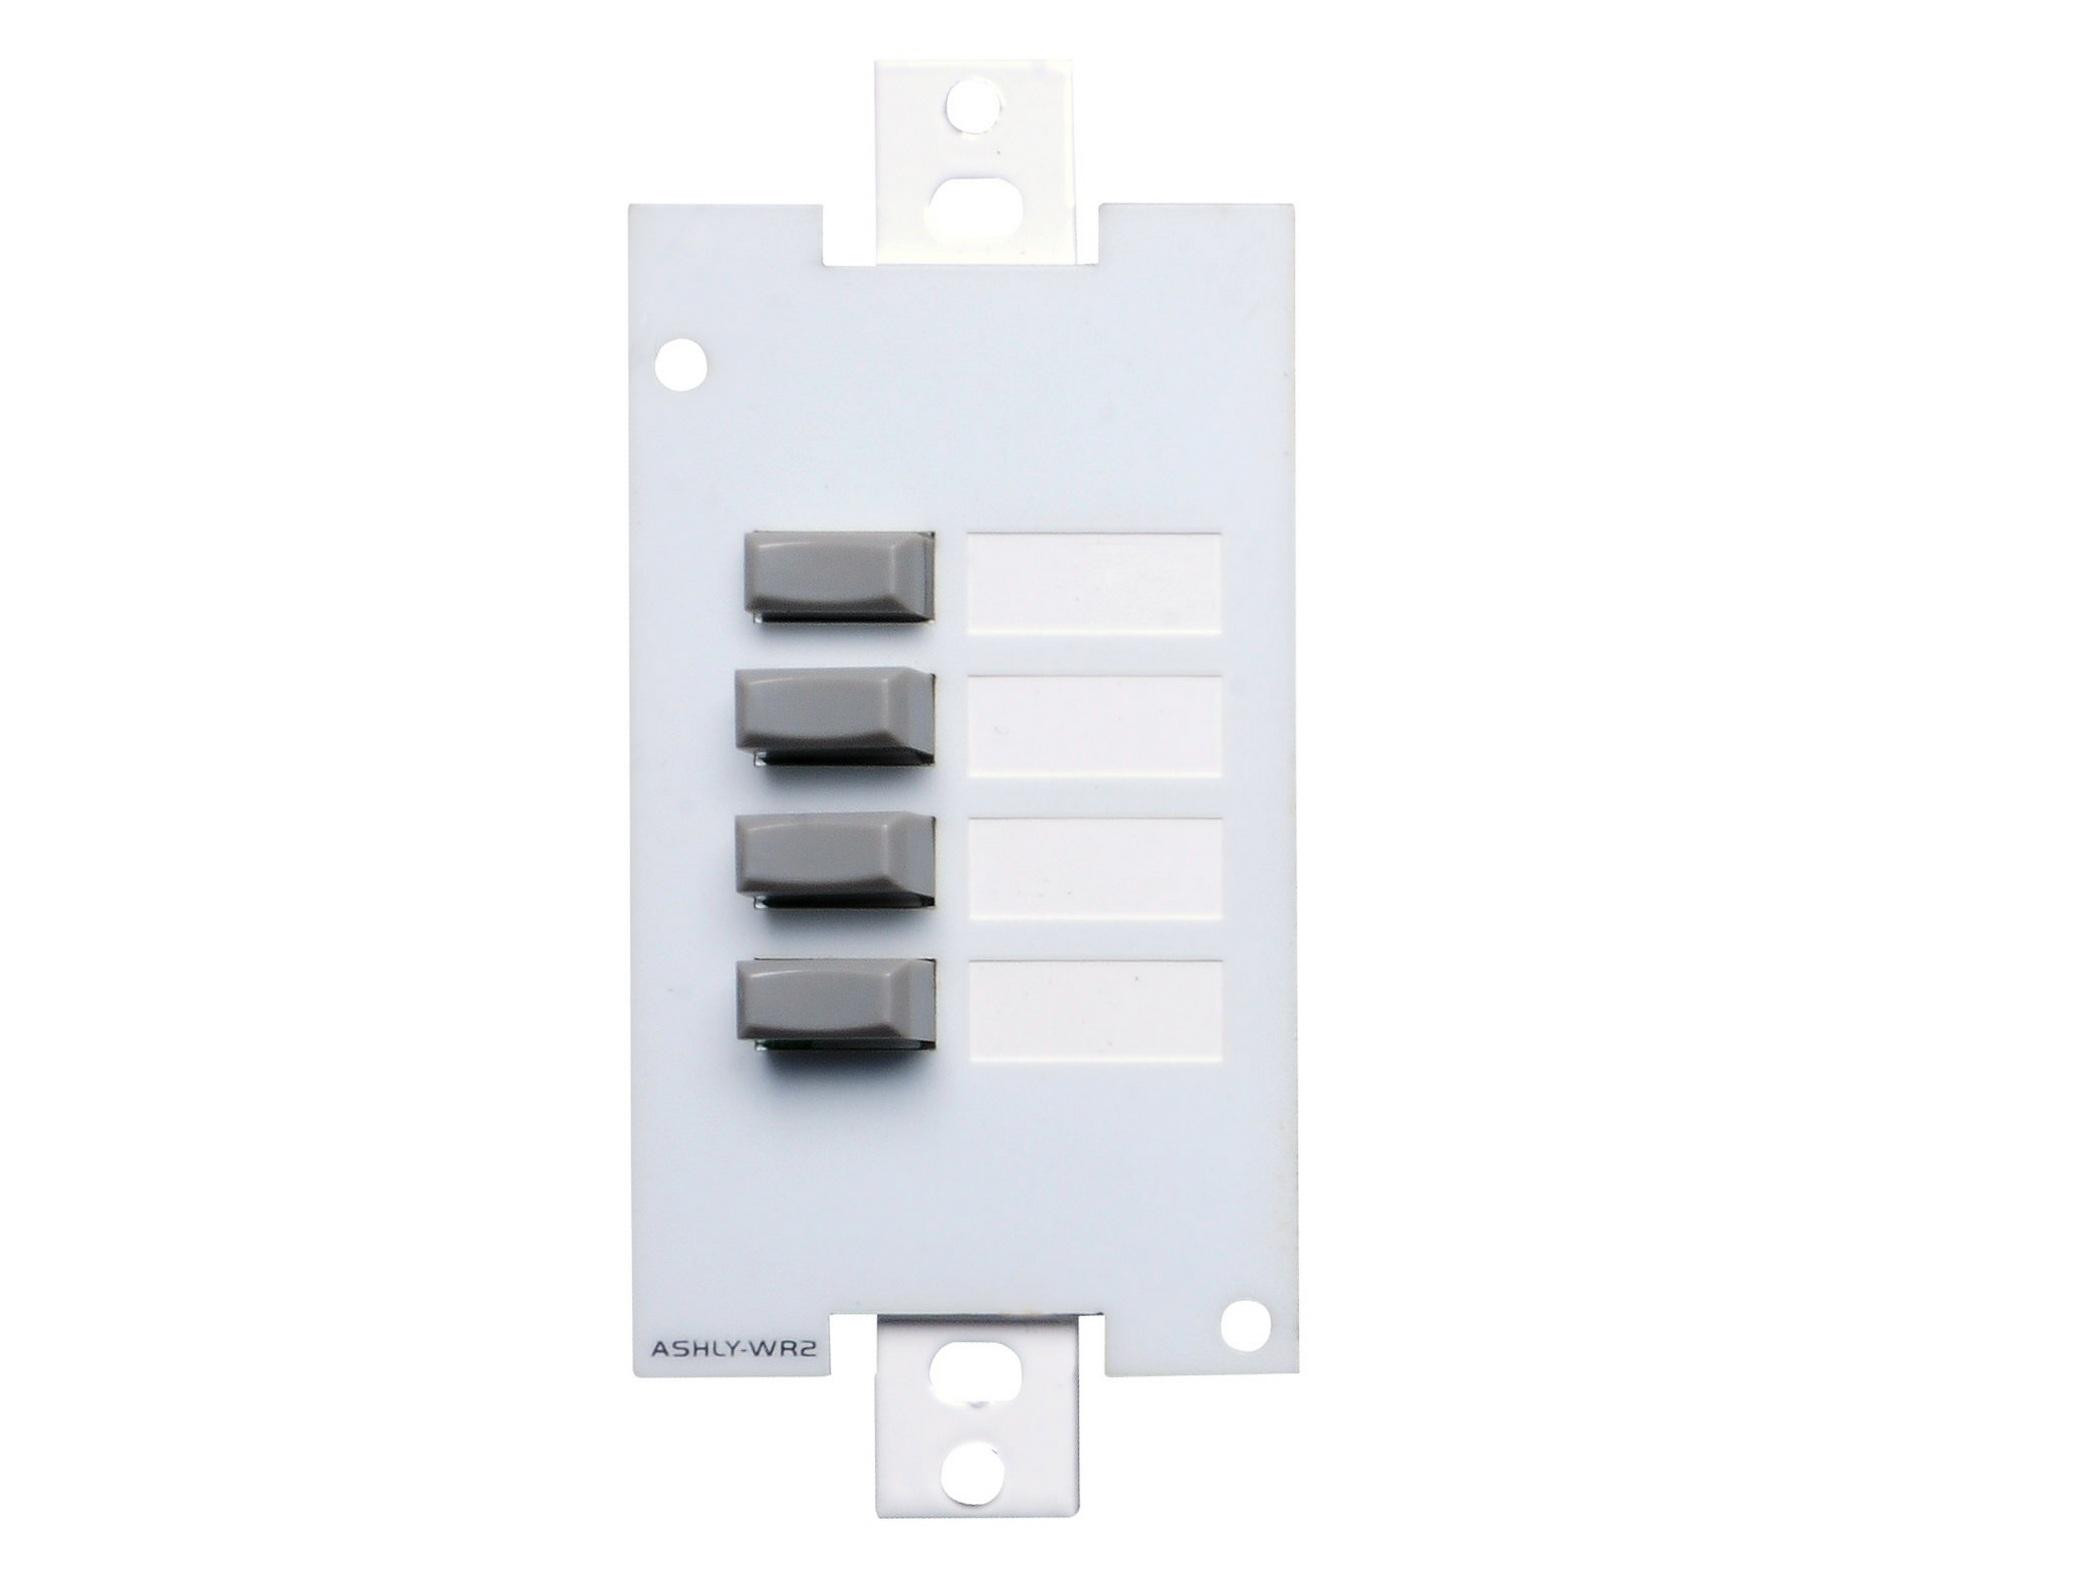 WR-2 Wall Remote/4-position pushbutton select by Ashly